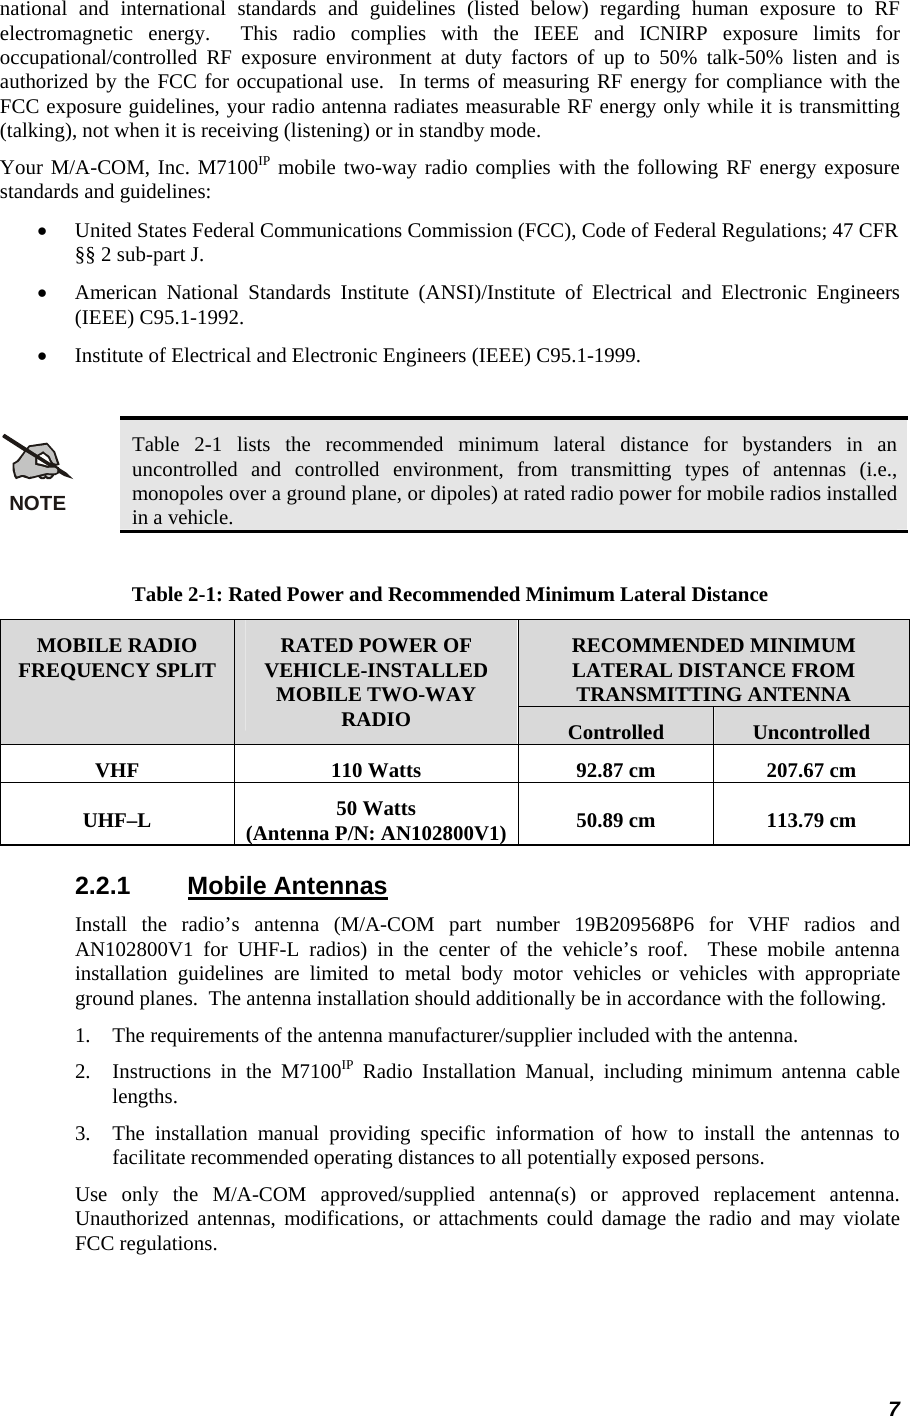 7 national and international standards and guidelines (listed below) regarding human exposure to RF electromagnetic energy.  This radio complies with the IEEE and ICNIRP exposure limits for occupational/controlled RF exposure environment at duty factors of up to 50% talk-50% listen and is authorized by the FCC for occupational use.  In terms of measuring RF energy for compliance with the FCC exposure guidelines, your radio antenna radiates measurable RF energy only while it is transmitting (talking), not when it is receiving (listening) or in standby mode. Your M/A-COM, Inc. M7100IP mobile two-way radio complies with the following RF energy exposure standards and guidelines: •  United States Federal Communications Commission (FCC), Code of Federal Regulations; 47 CFR §§ 2 sub-part J. •  American National Standards Institute (ANSI)/Institute of Electrical and Electronic Engineers (IEEE) C95.1-1992. •  Institute of Electrical and Electronic Engineers (IEEE) C95.1-1999.  NOTE Table 2-1 lists the recommended minimum lateral distance for bystanders in an uncontrolled and controlled environment, from transmitting types of antennas (i.e., monopoles over a ground plane, or dipoles) at rated radio power for mobile radios installed in a vehicle.  Table 2-1: Rated Power and Recommended Minimum Lateral Distance RECOMMENDED MINIMUM LATERAL DISTANCE FROM TRANSMITTING ANTENNA MOBILE RADIO FREQUENCY SPLIT  RATED POWER OF VEHICLE-INSTALLED MOBILE TWO-WAY RADIO  Controlled  Uncontrolled VHF  110 Watts  92.87 cm  207.67 cm UHF–L  50 Watts (Antenna P/N: AN102800V1)  50.89 cm  113.79 cm 2.2.1 Mobile Antennas Install the radio’s antenna (M/A-COM part number 19B209568P6 for VHF radios and AN102800V1 for UHF-L radios) in the center of the vehicle’s roof.  These mobile antenna installation guidelines are limited to metal body motor vehicles or vehicles with appropriate ground planes.  The antenna installation should additionally be in accordance with the following. 1.  The requirements of the antenna manufacturer/supplier included with the antenna. 2.  Instructions in the M7100IP Radio Installation Manual, including minimum antenna cable lengths. 3.  The installation manual providing specific information of how to install the antennas to facilitate recommended operating distances to all potentially exposed persons. Use only the M/A-COM approved/supplied antenna(s) or approved replacement antenna.  Unauthorized antennas, modifications, or attachments could damage the radio and may violate FCC regulations. 